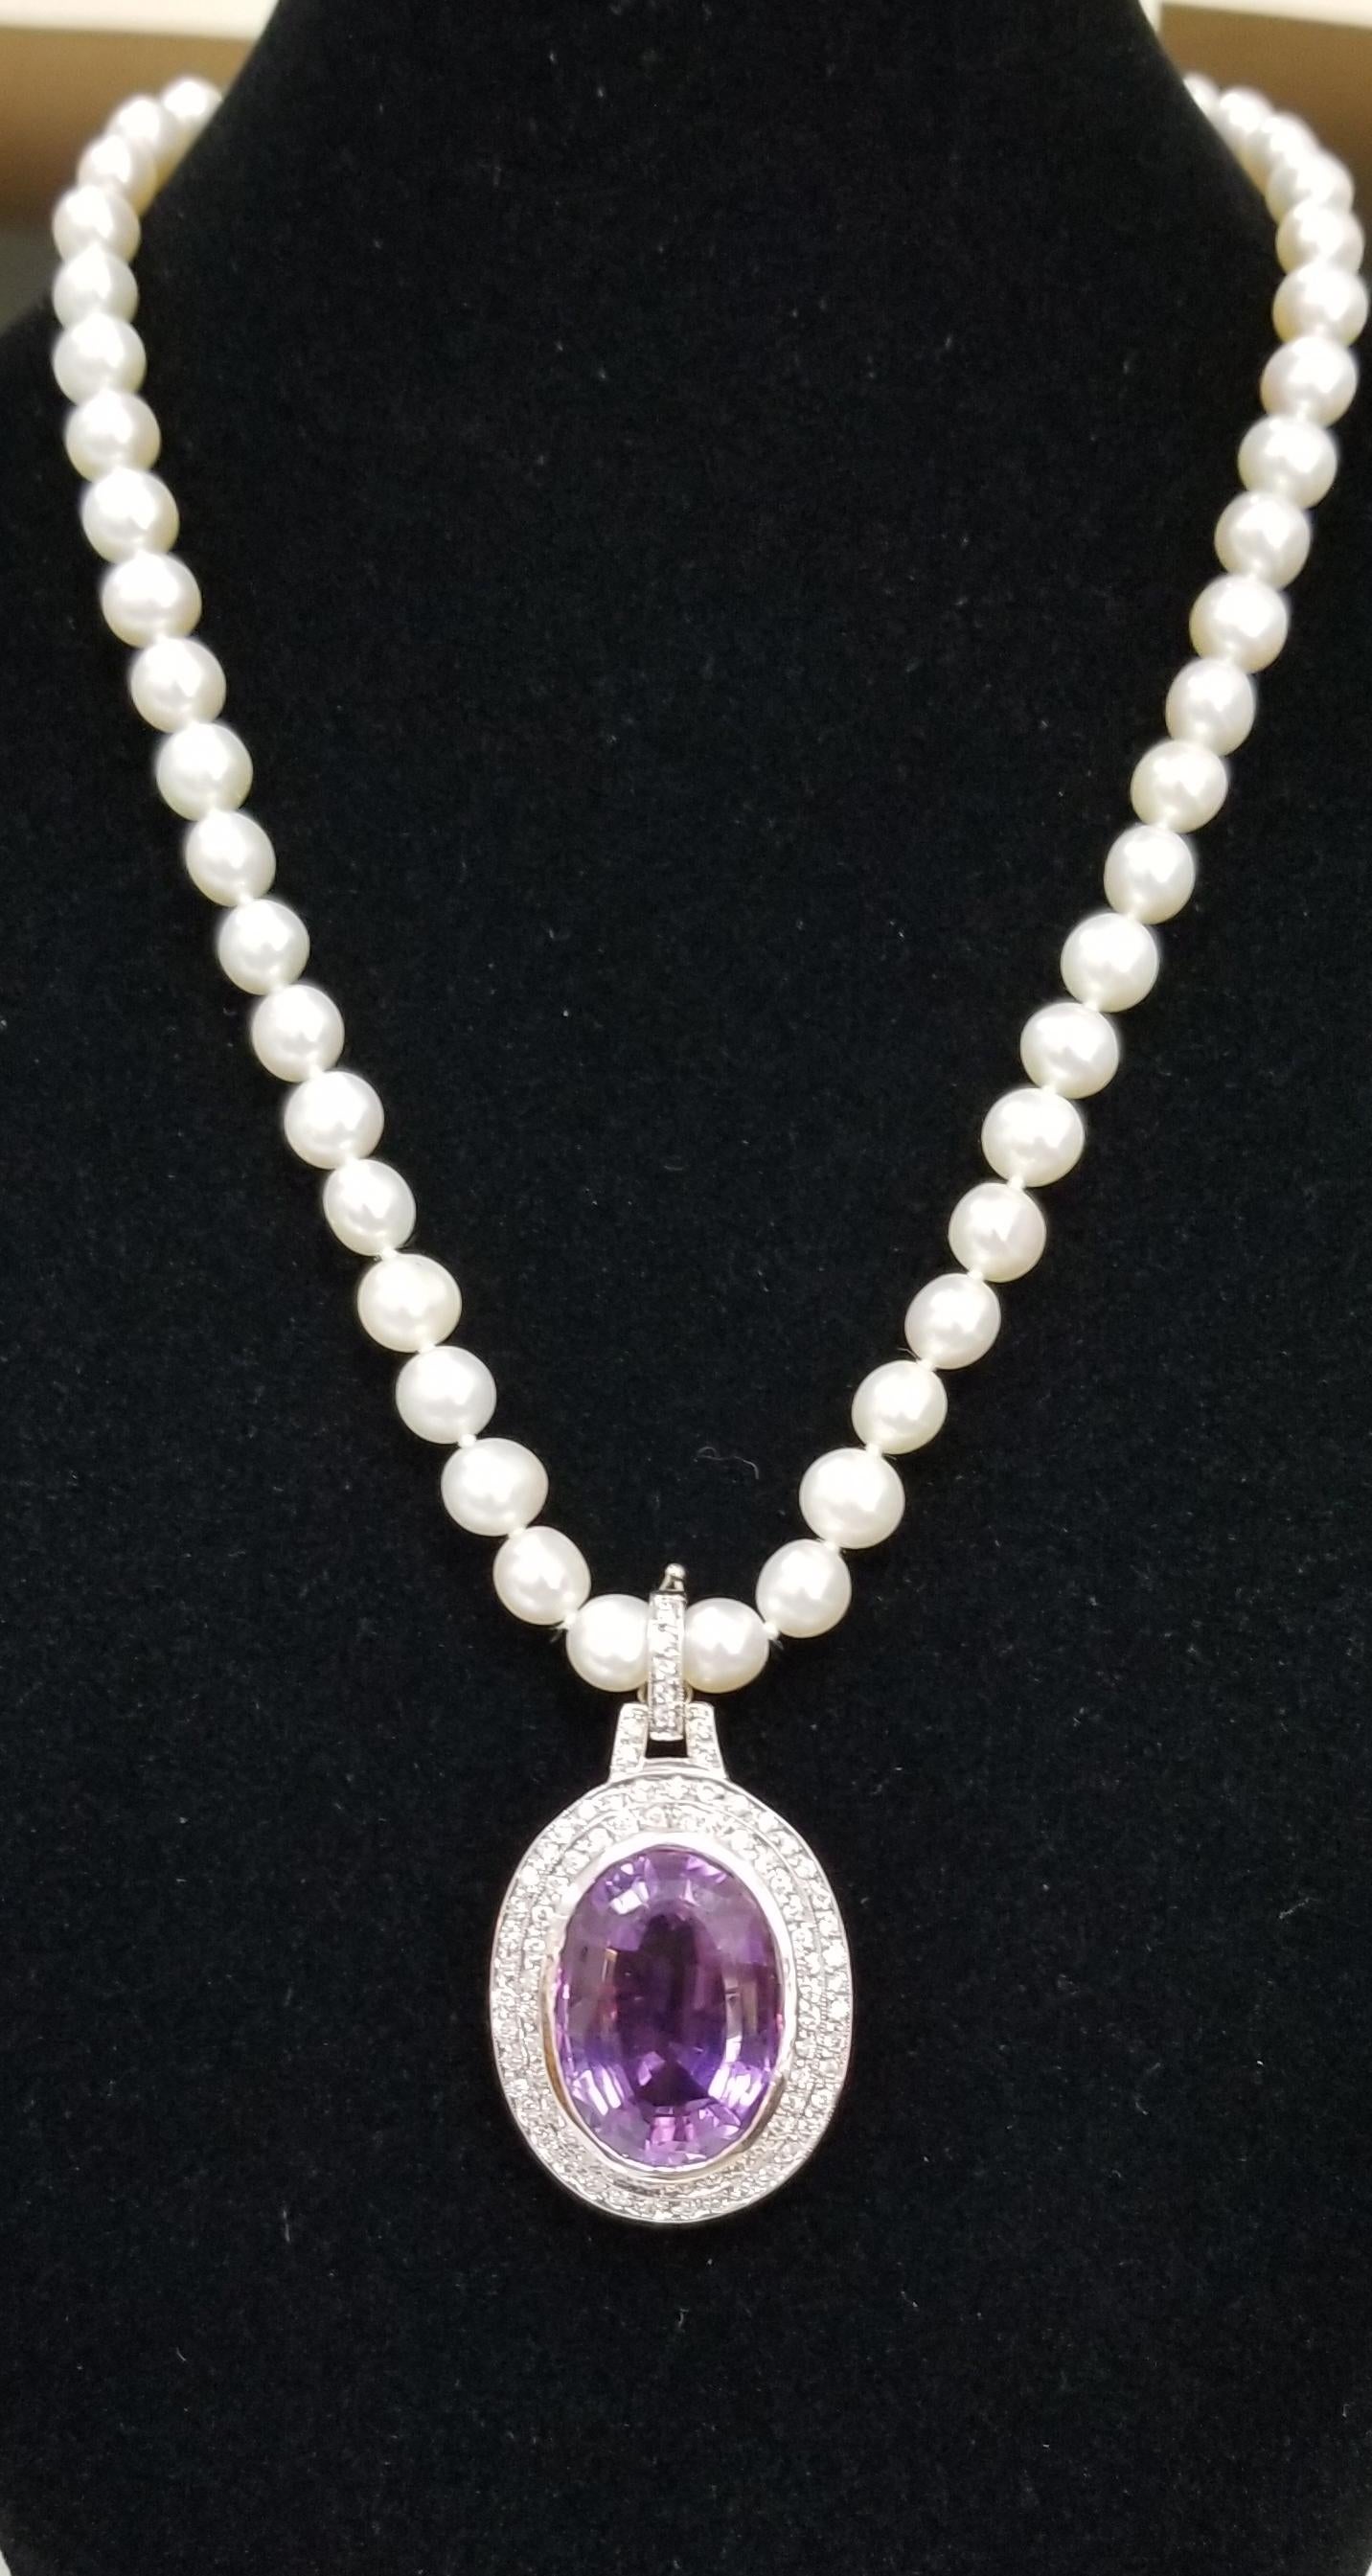 14k white gold amethyst and diamond pendant, containing 1 oval cut amethyst weighing 22.75cts. surrounded by 2 rows of 82 round full cut diamonds weighing 1.10cts. The piece is detachable on a 16 inch 7mm fresh water pearls. 